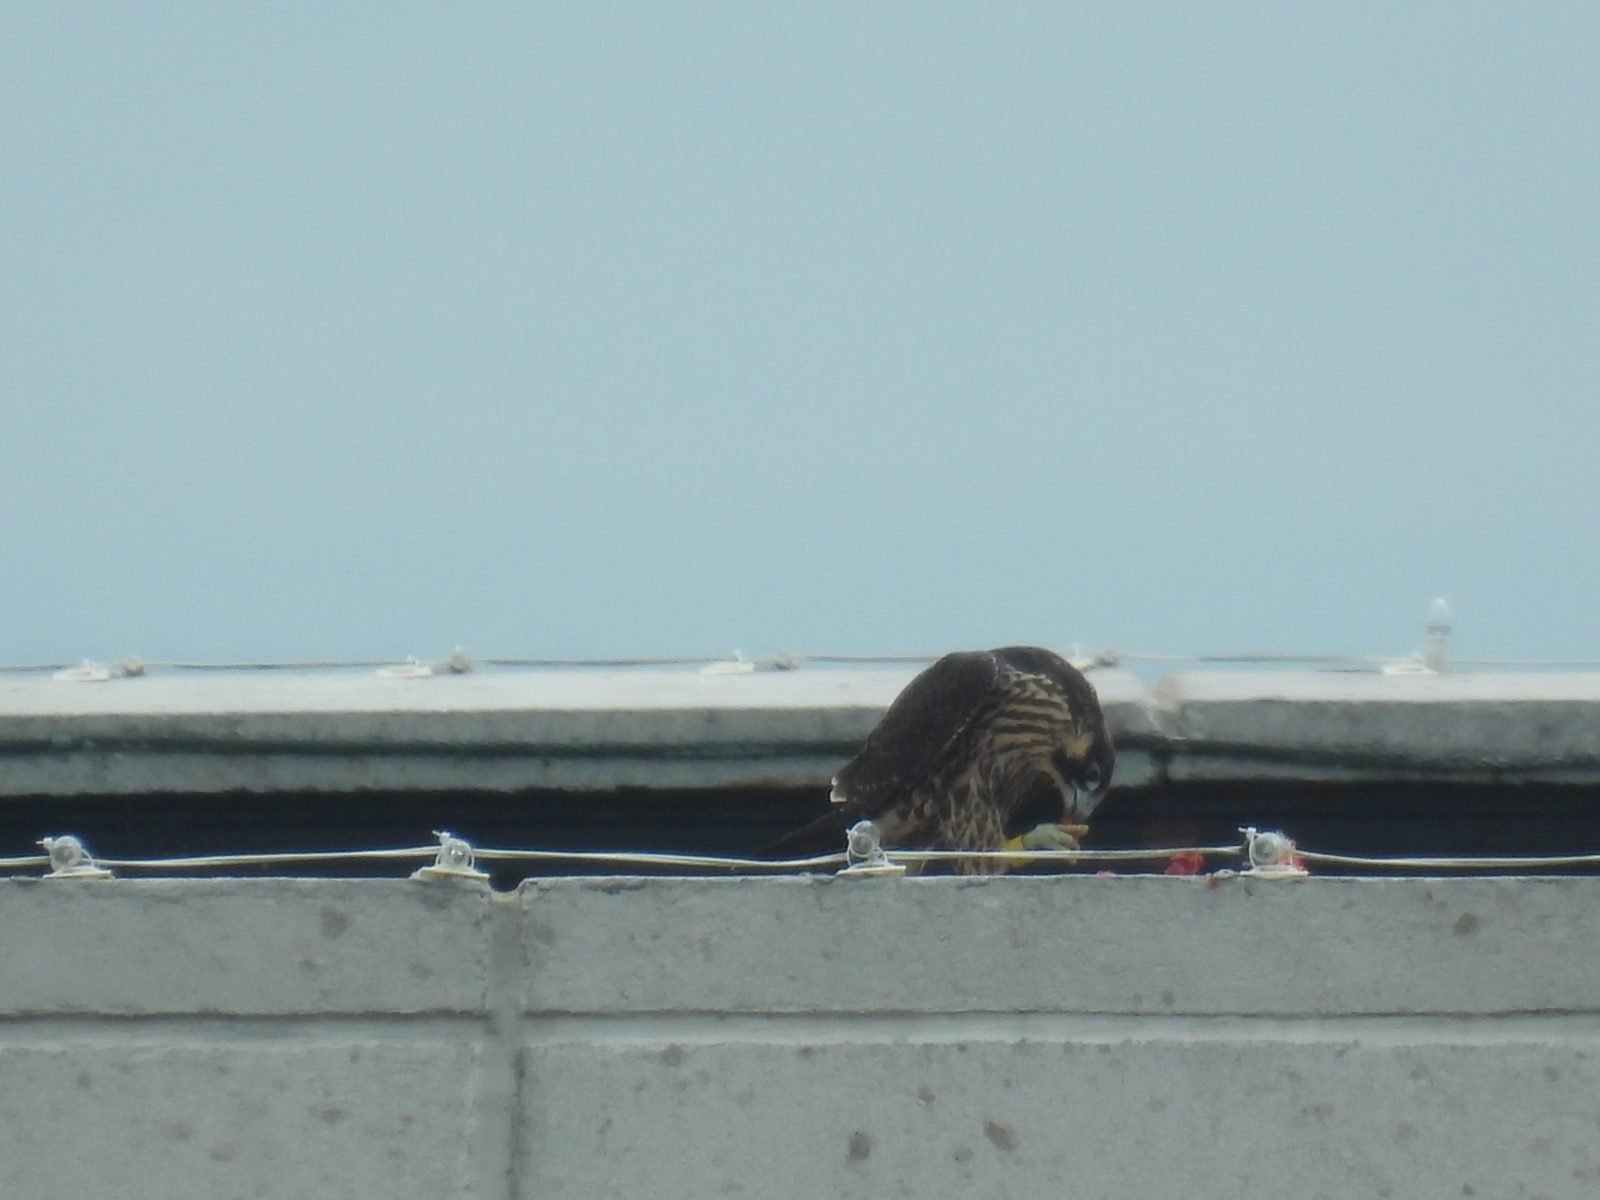 'Yellow' feeding atop the Bank of America building.